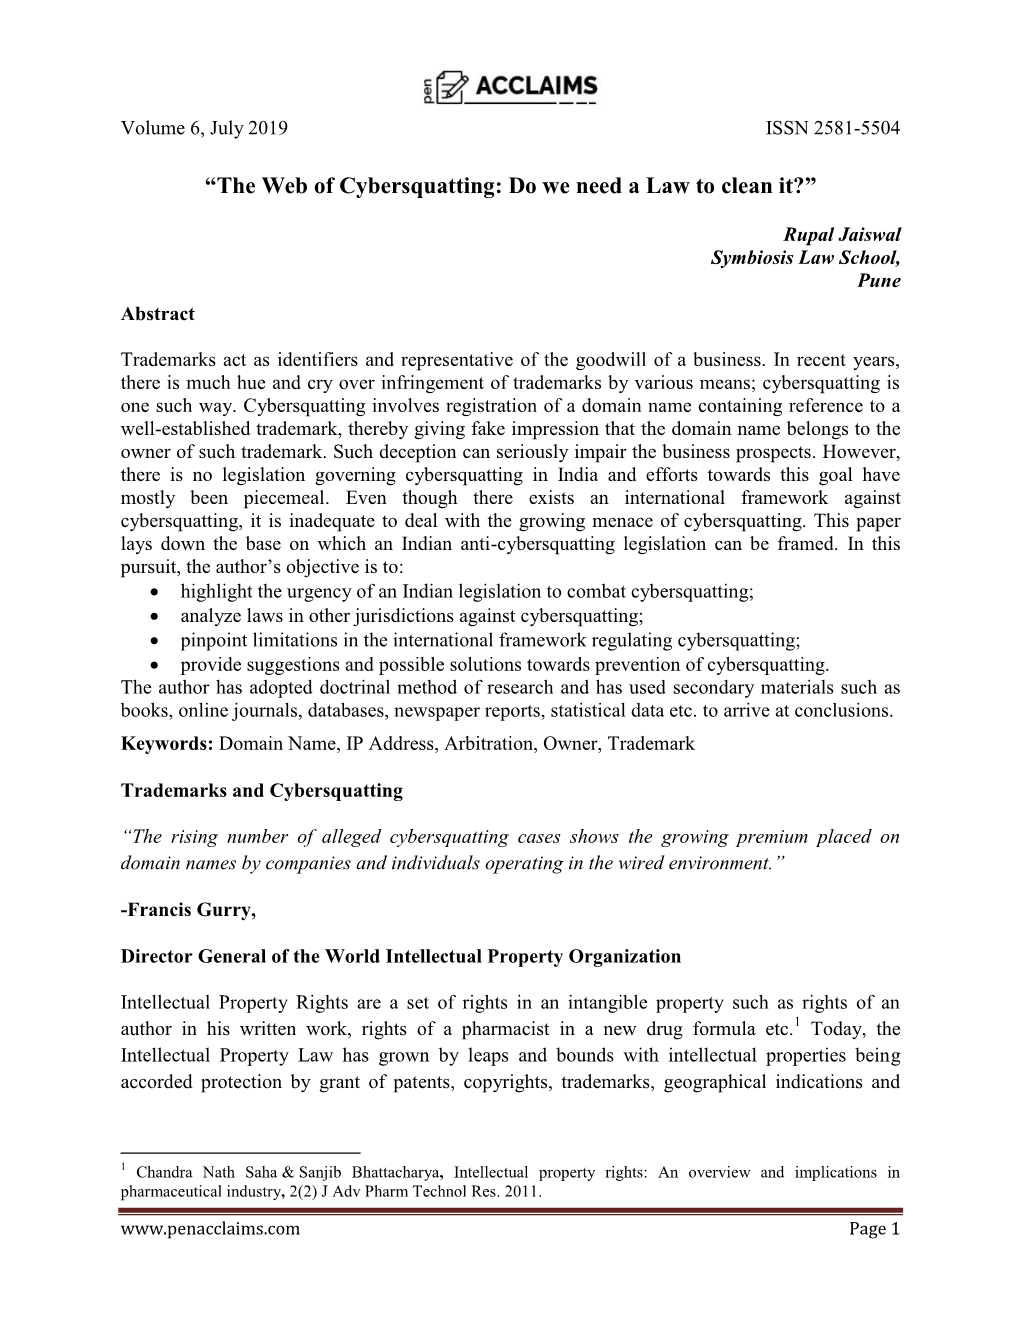 “The Web of Cybersquatting: Do We Need a Law to Clean It?”; Rupal